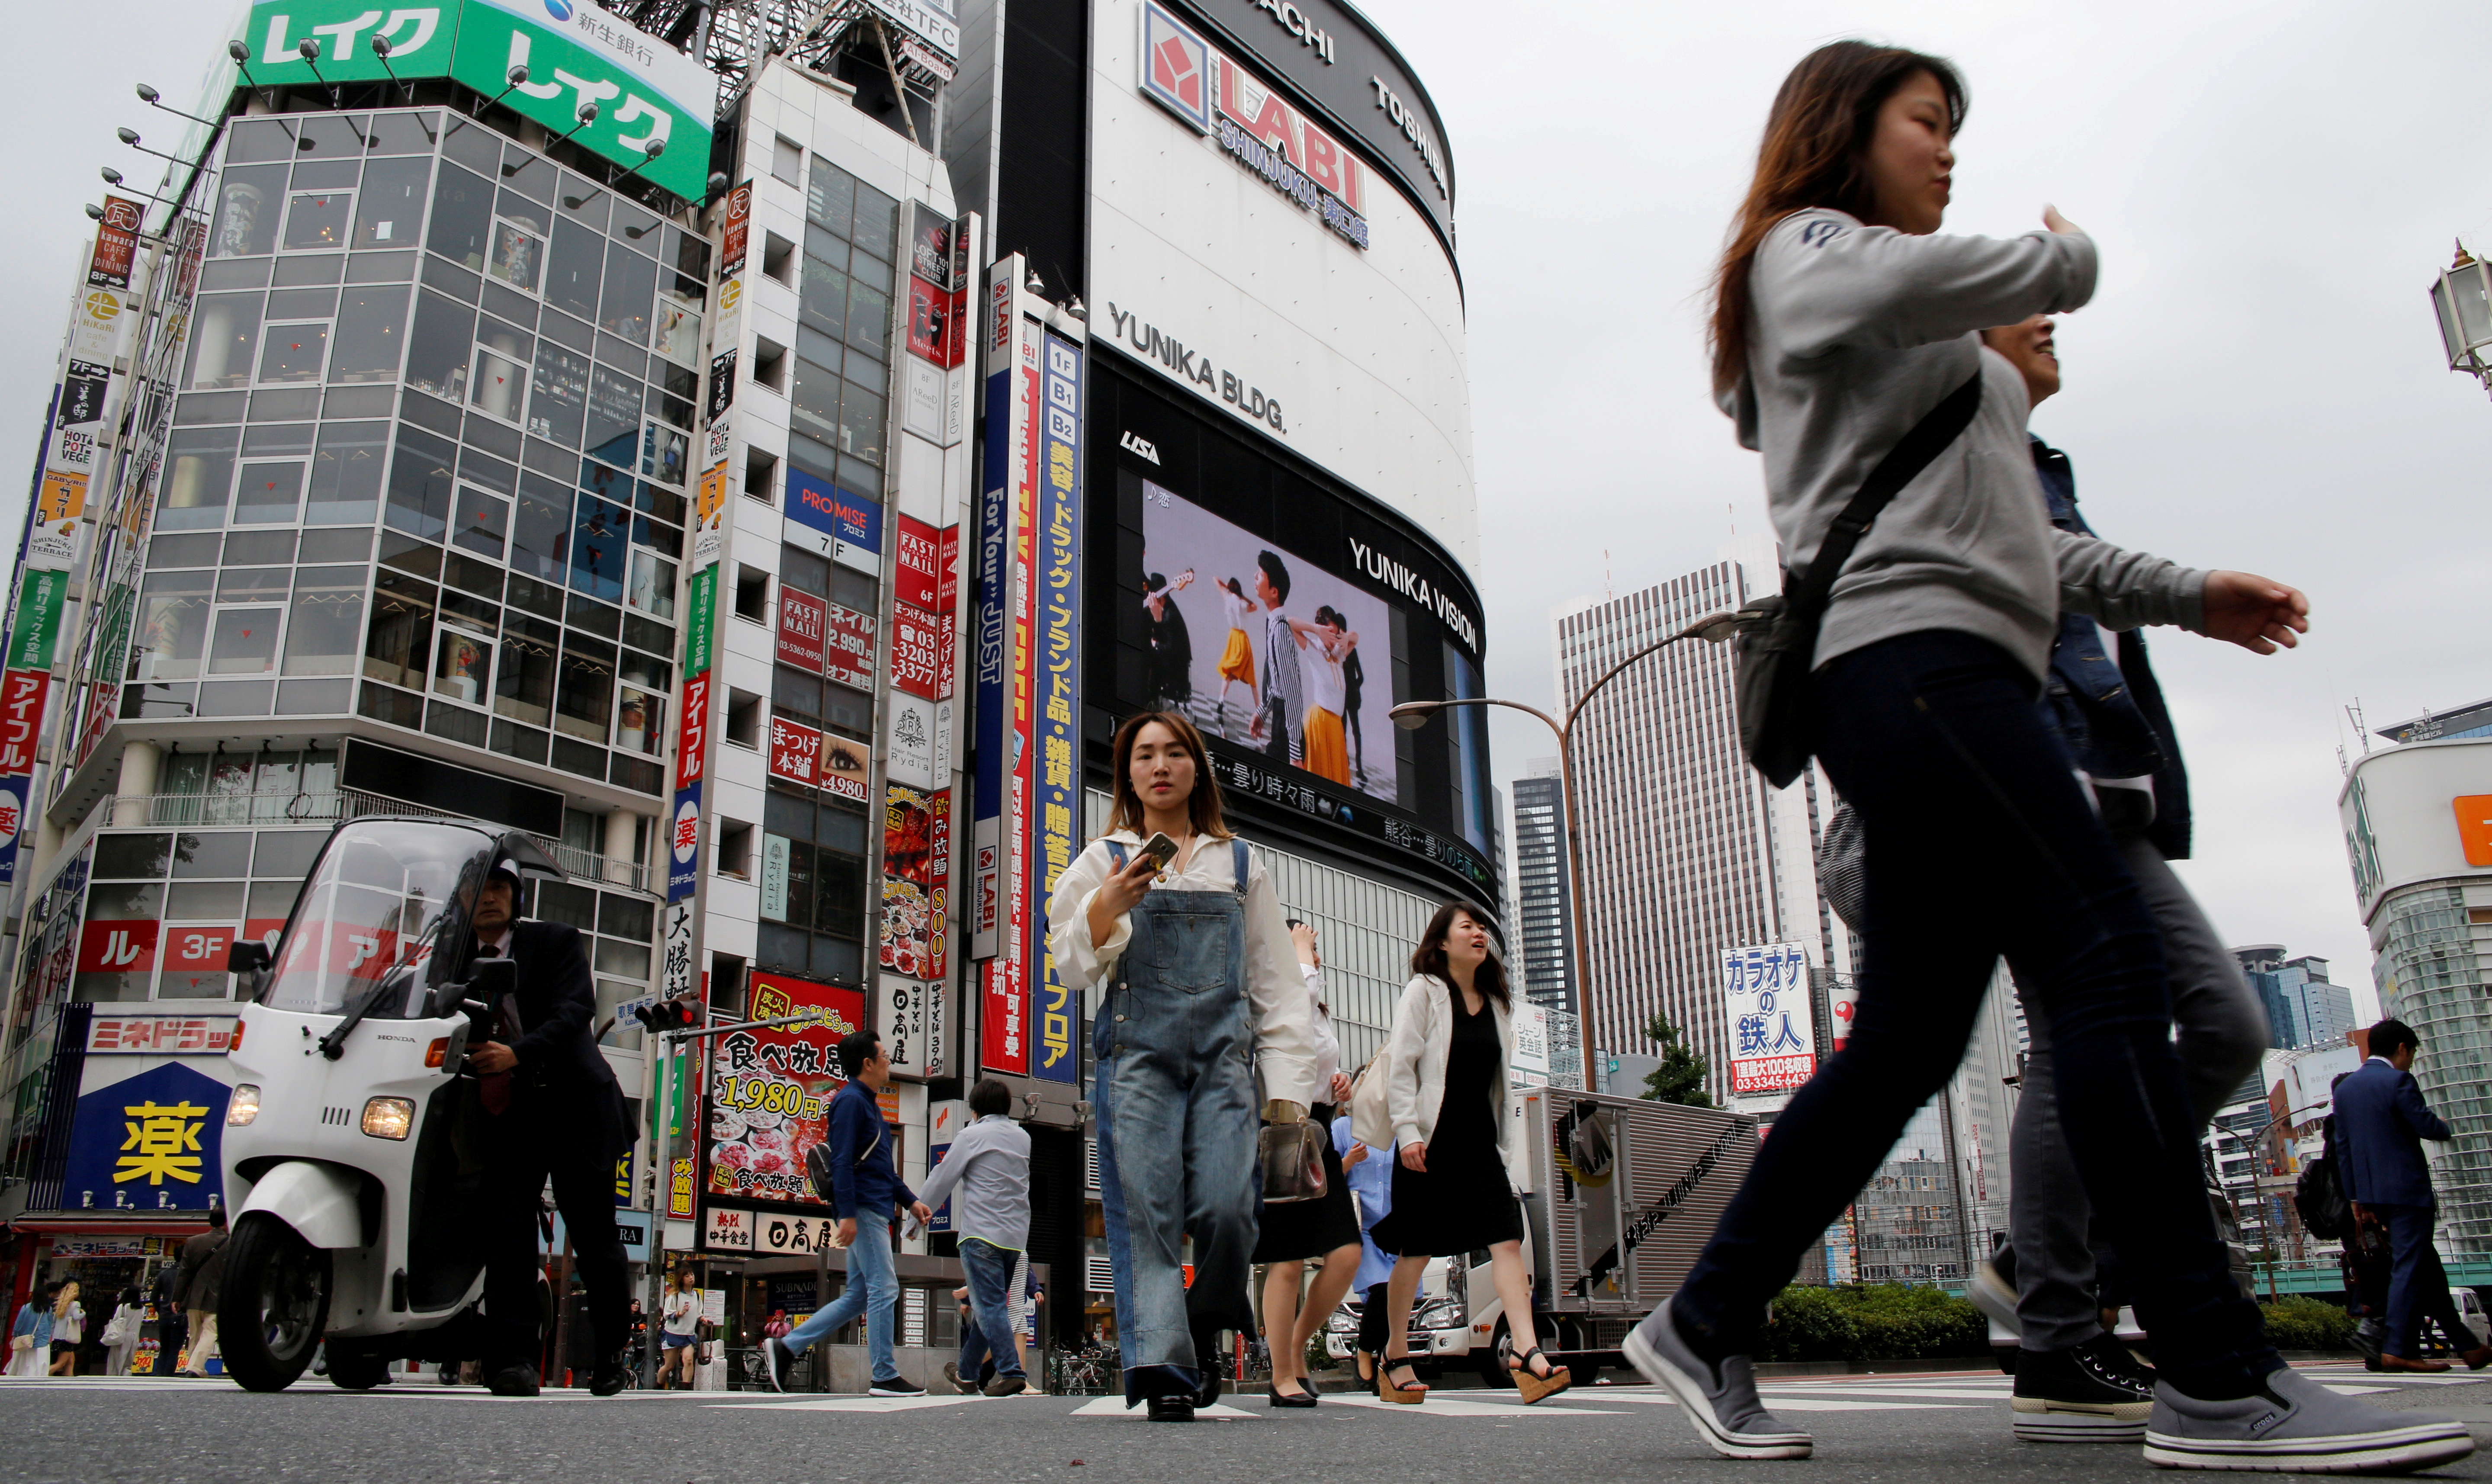 People cross a street in the Shinjuku shopping and business district in Tokyo